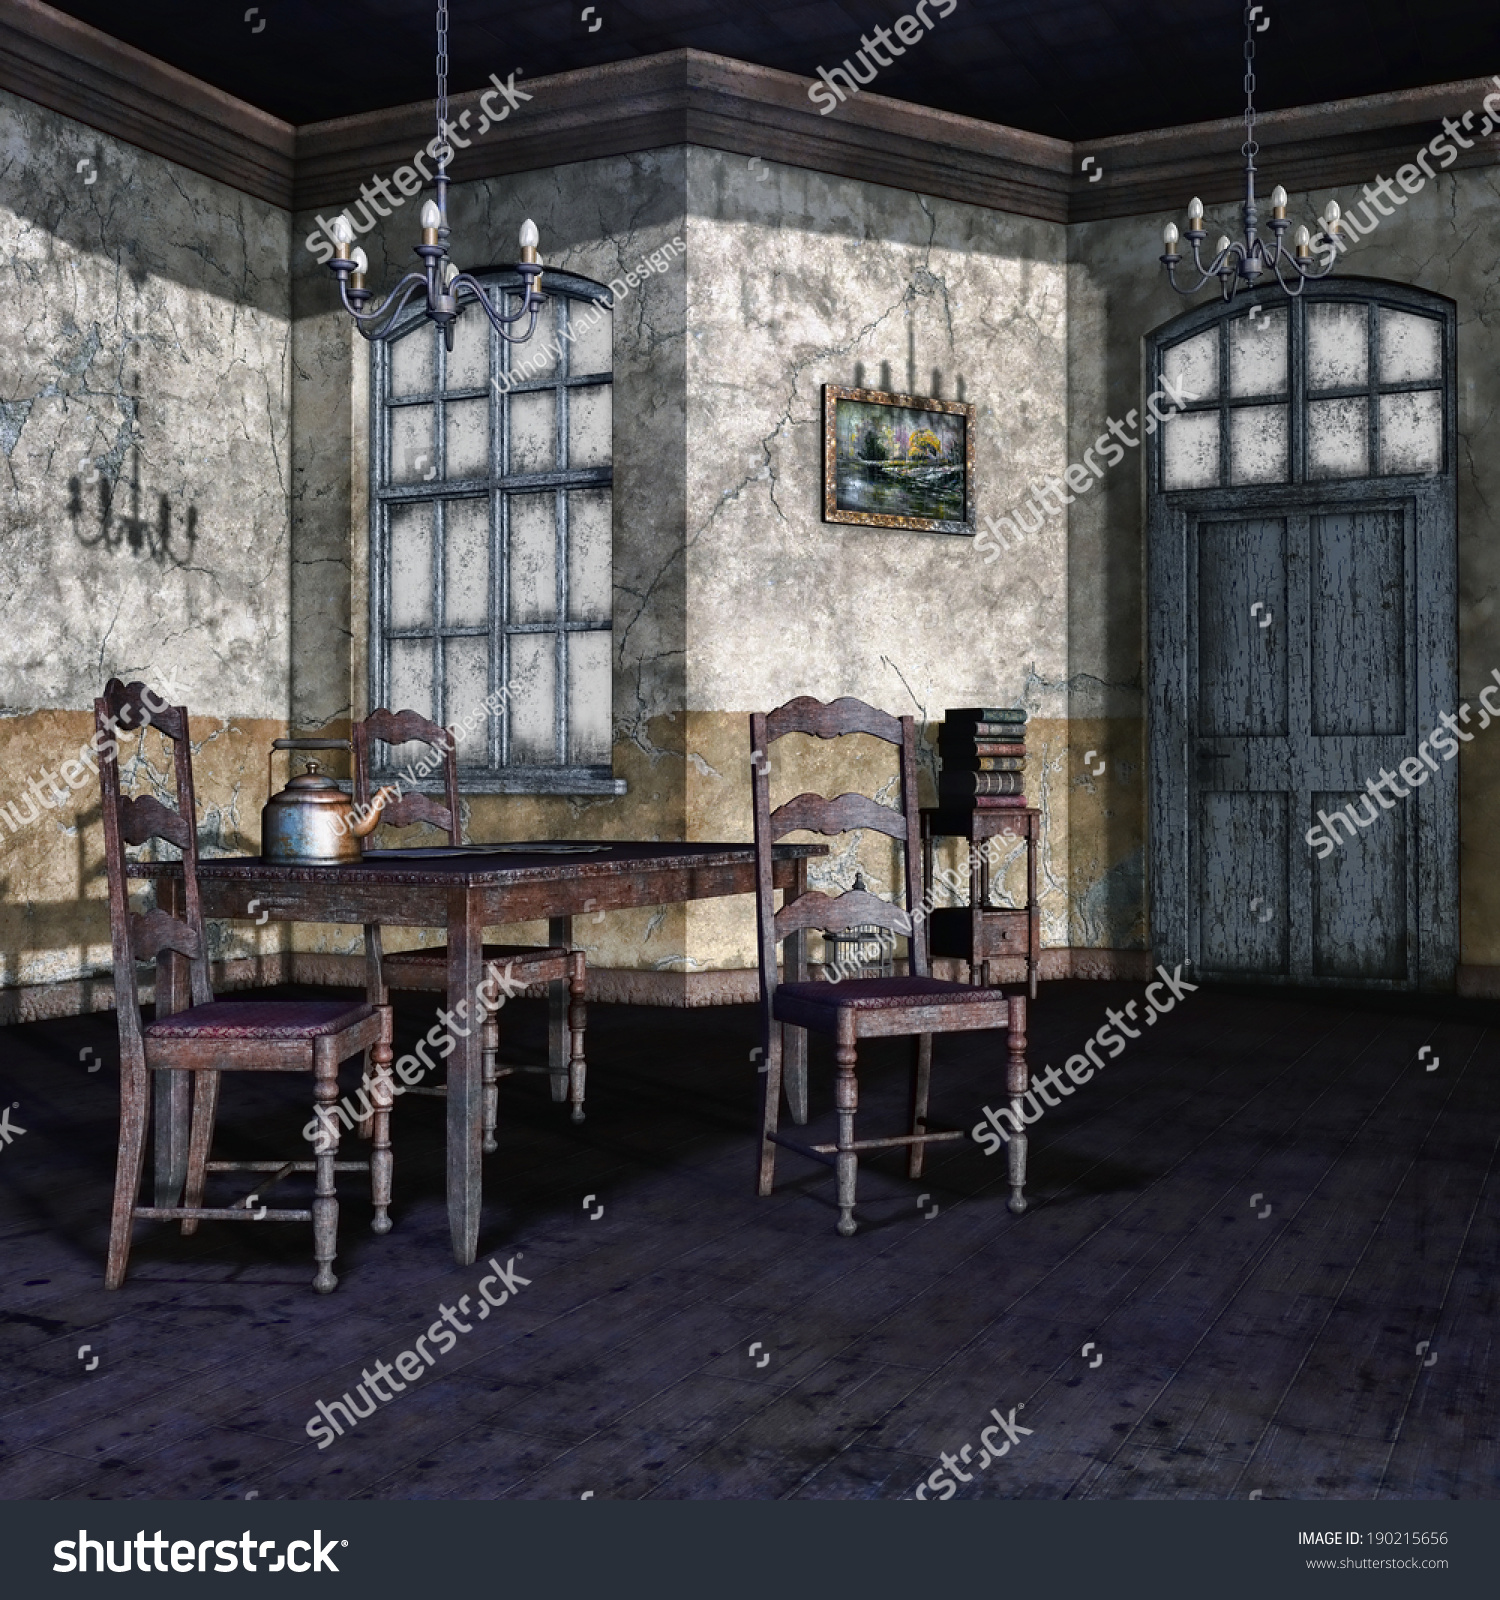 Old Dining Room Table Kettle Chairs Stock Illustration 190215656